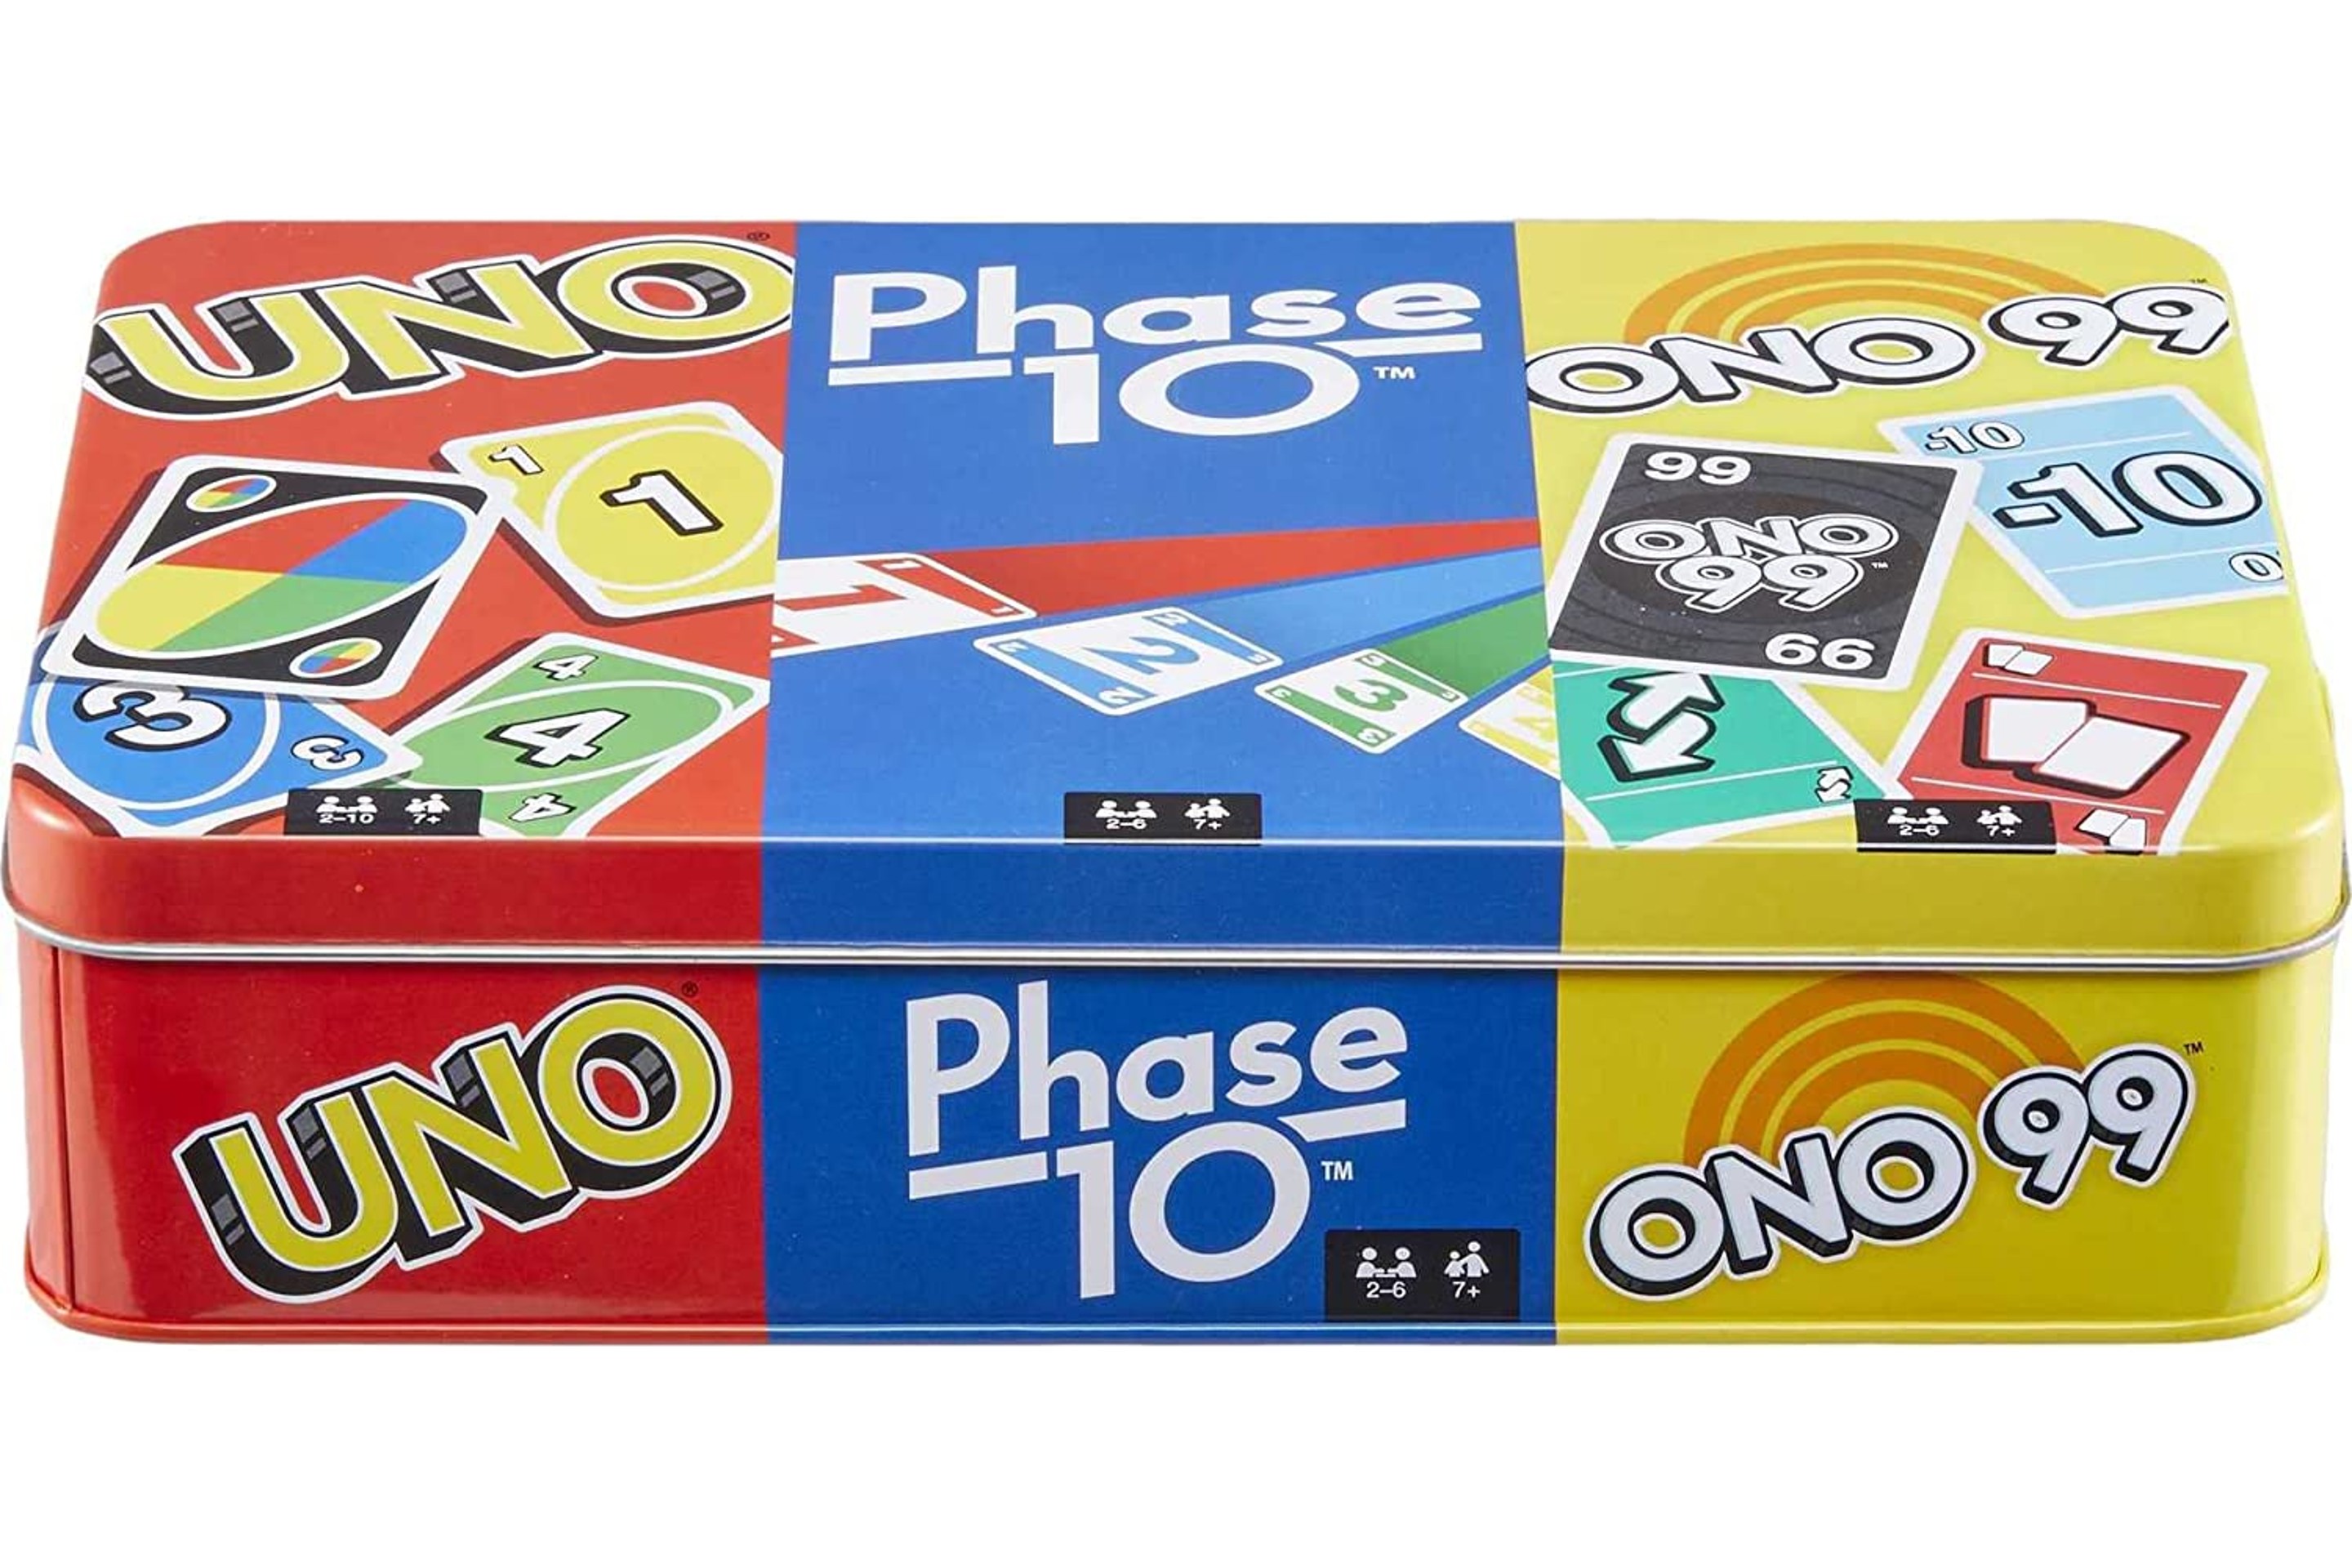 Mattel Card Games - UNO, Phase 10, and ONO 99